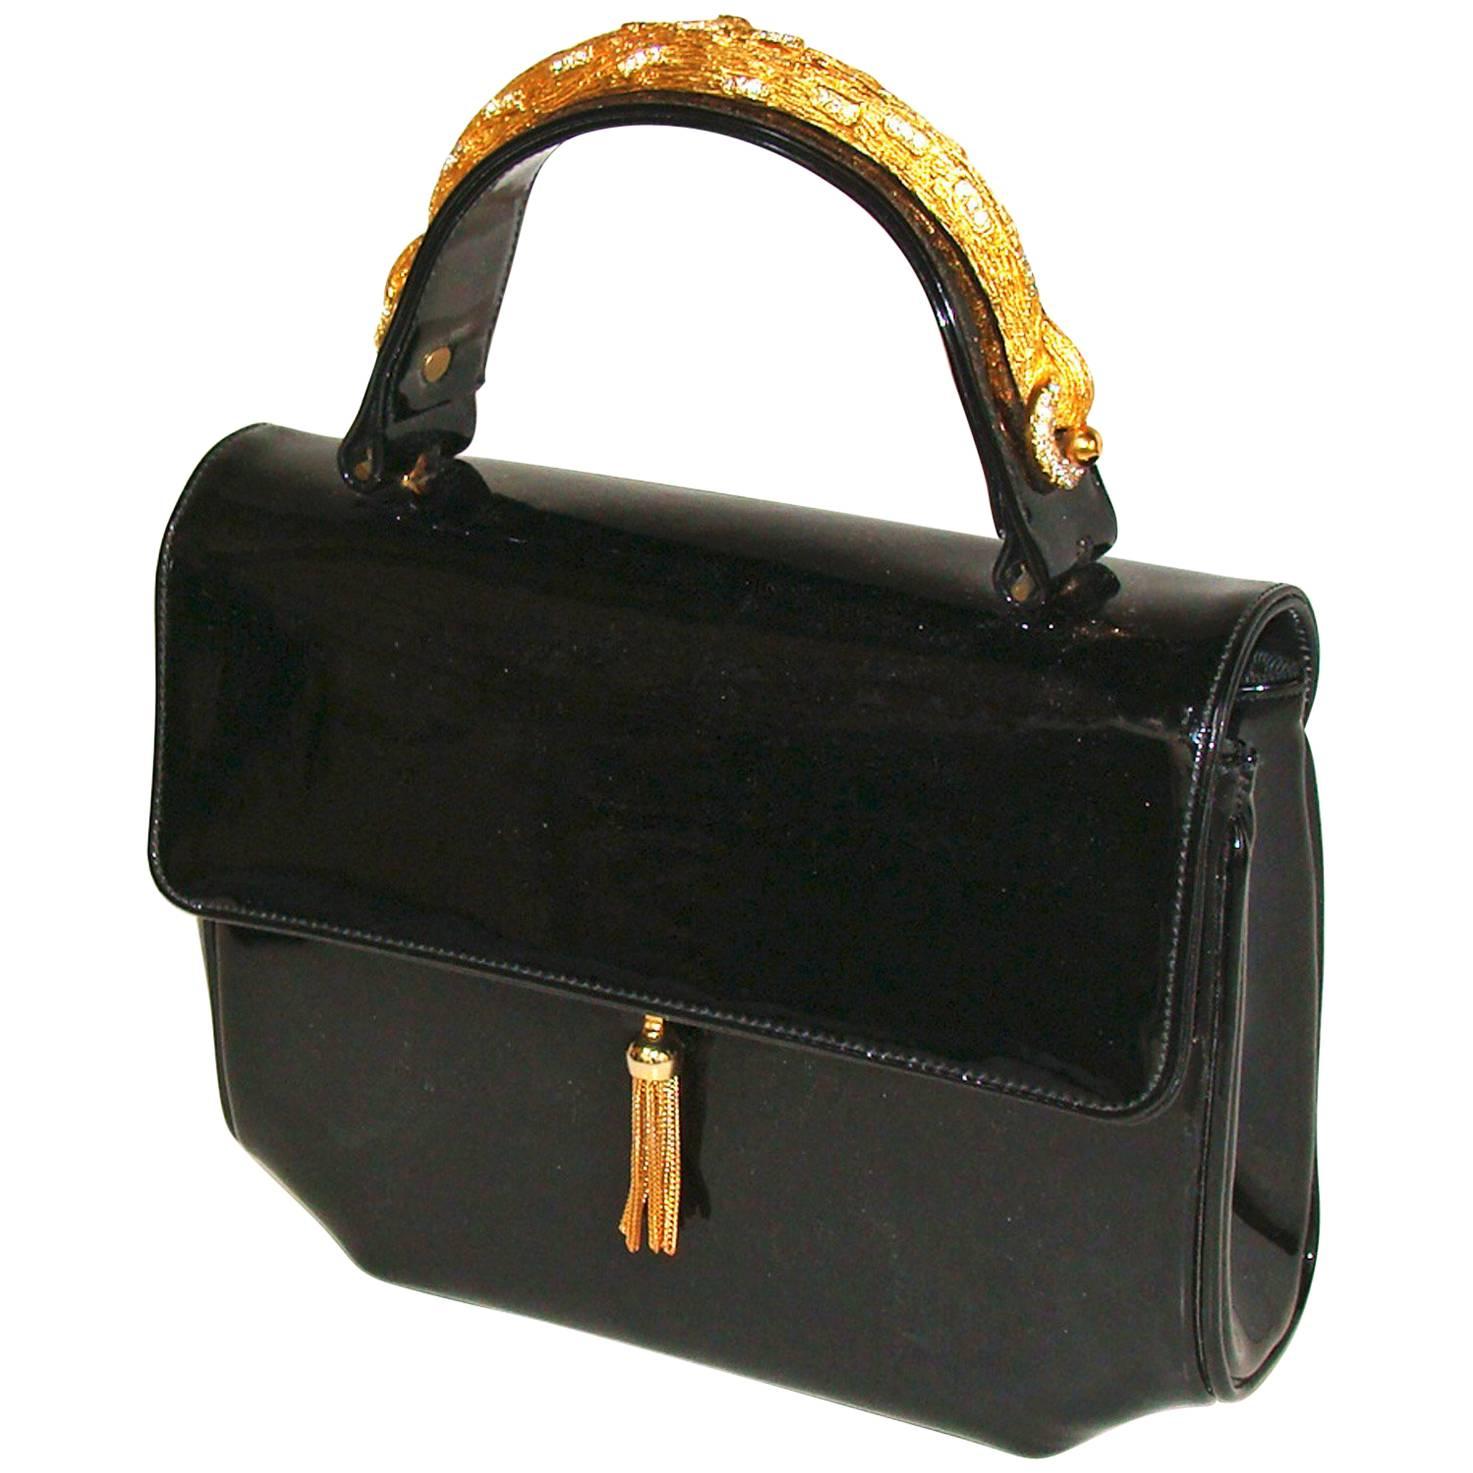 Black Patent Leather Bag With Rhinestones SUMMER!